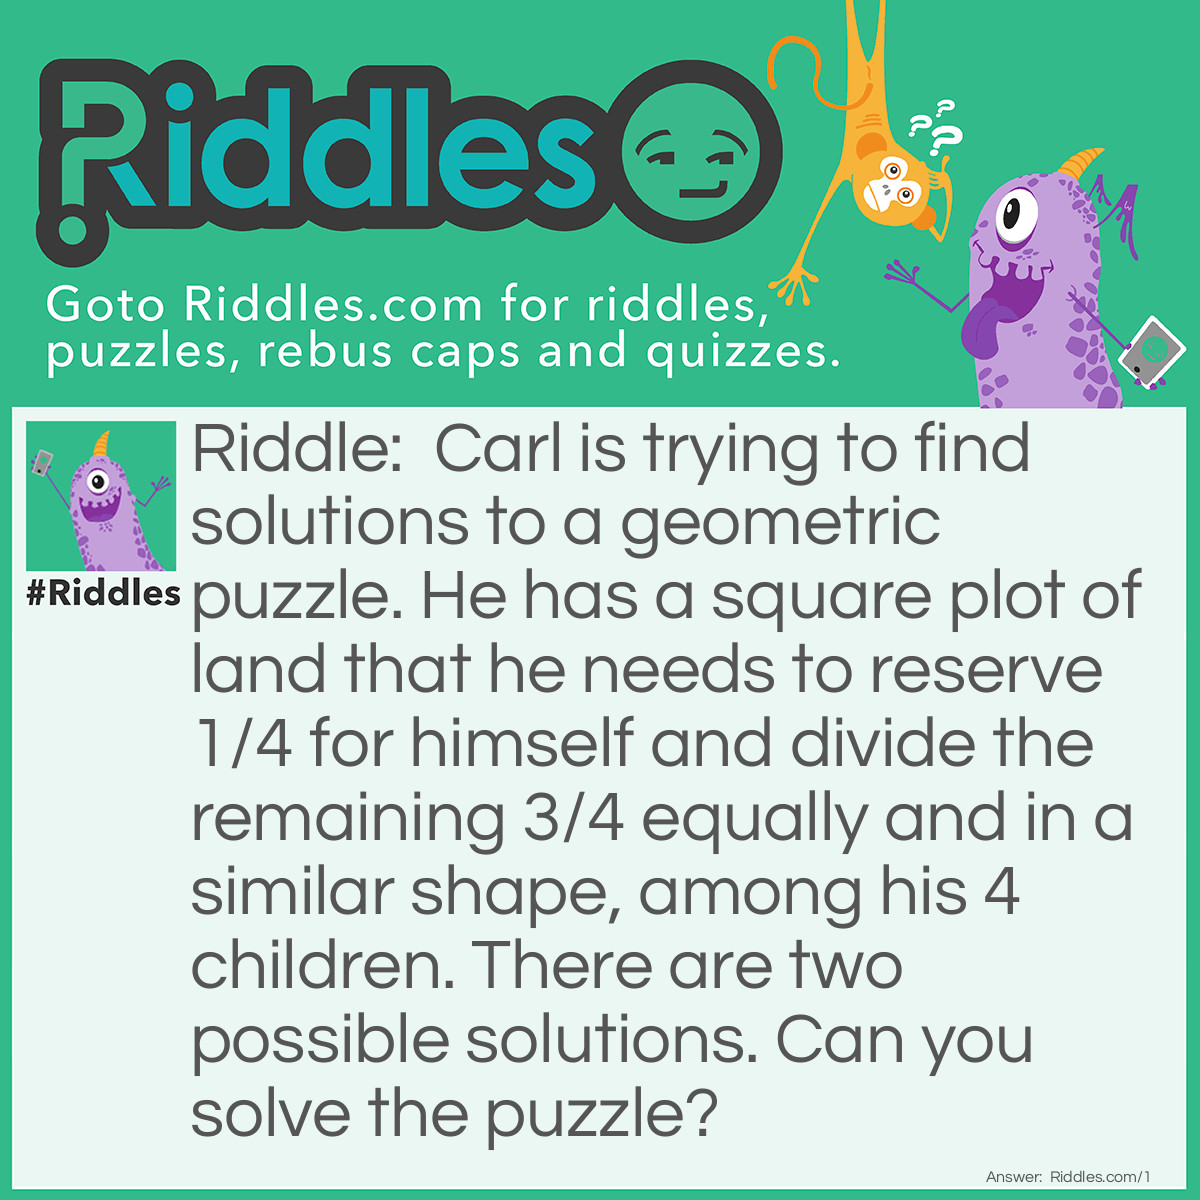 Riddle: Carl is trying to find solutions to a geometric puzzle. He has a square plot of land that he needs to reserve 1/4 for himself and divide the remaining 3/4 equally and in a similar shape, among his 4 <a href="/riddles-for-kids">children</a>. There are two possible solutions. Can you solve the puzzle? Answer: <strong>Solution #1 - Squares</strong>
First, Carl divides his as to reserve to himself one-fourth in the form of a square.
<img src="/uploads/images/Geometric-Puzzle-1.jpg" alt="Geometric Puzzle #1" width="600" height="600" />
Then, Carl takes the remaining 3/4 shape and scales it down by 1/4.  He then, multiplies the shape into 4 identically shaped pieces, and aranges them so that they fit into the original 3/4 shape.
<img src="/uploads/images/Geometric-Puzzle-1-Answer.jpg" alt="Geometric Puzzle #1 Solution 1" width="600" height="600" />
<strong>Solution #2 - Rectangles</strong>
First, create a triangle that is 1/4 the size of the square.
<img src="/uploads/images/Geometric-Puzzle-1-Answer-2.jpg" alt="" />
Now, with straight lines, create two squares.
Proceed to disect the two squares with horizontal lines creating 4 triangles.
Then, disect one of the resultuing triangles from each square.  The shape of land for each of his four children is divided evenly and is the same shape.
<img src="/uploads/images/Geometric-Puzzle-1-Solution-2.jpg" alt="" />